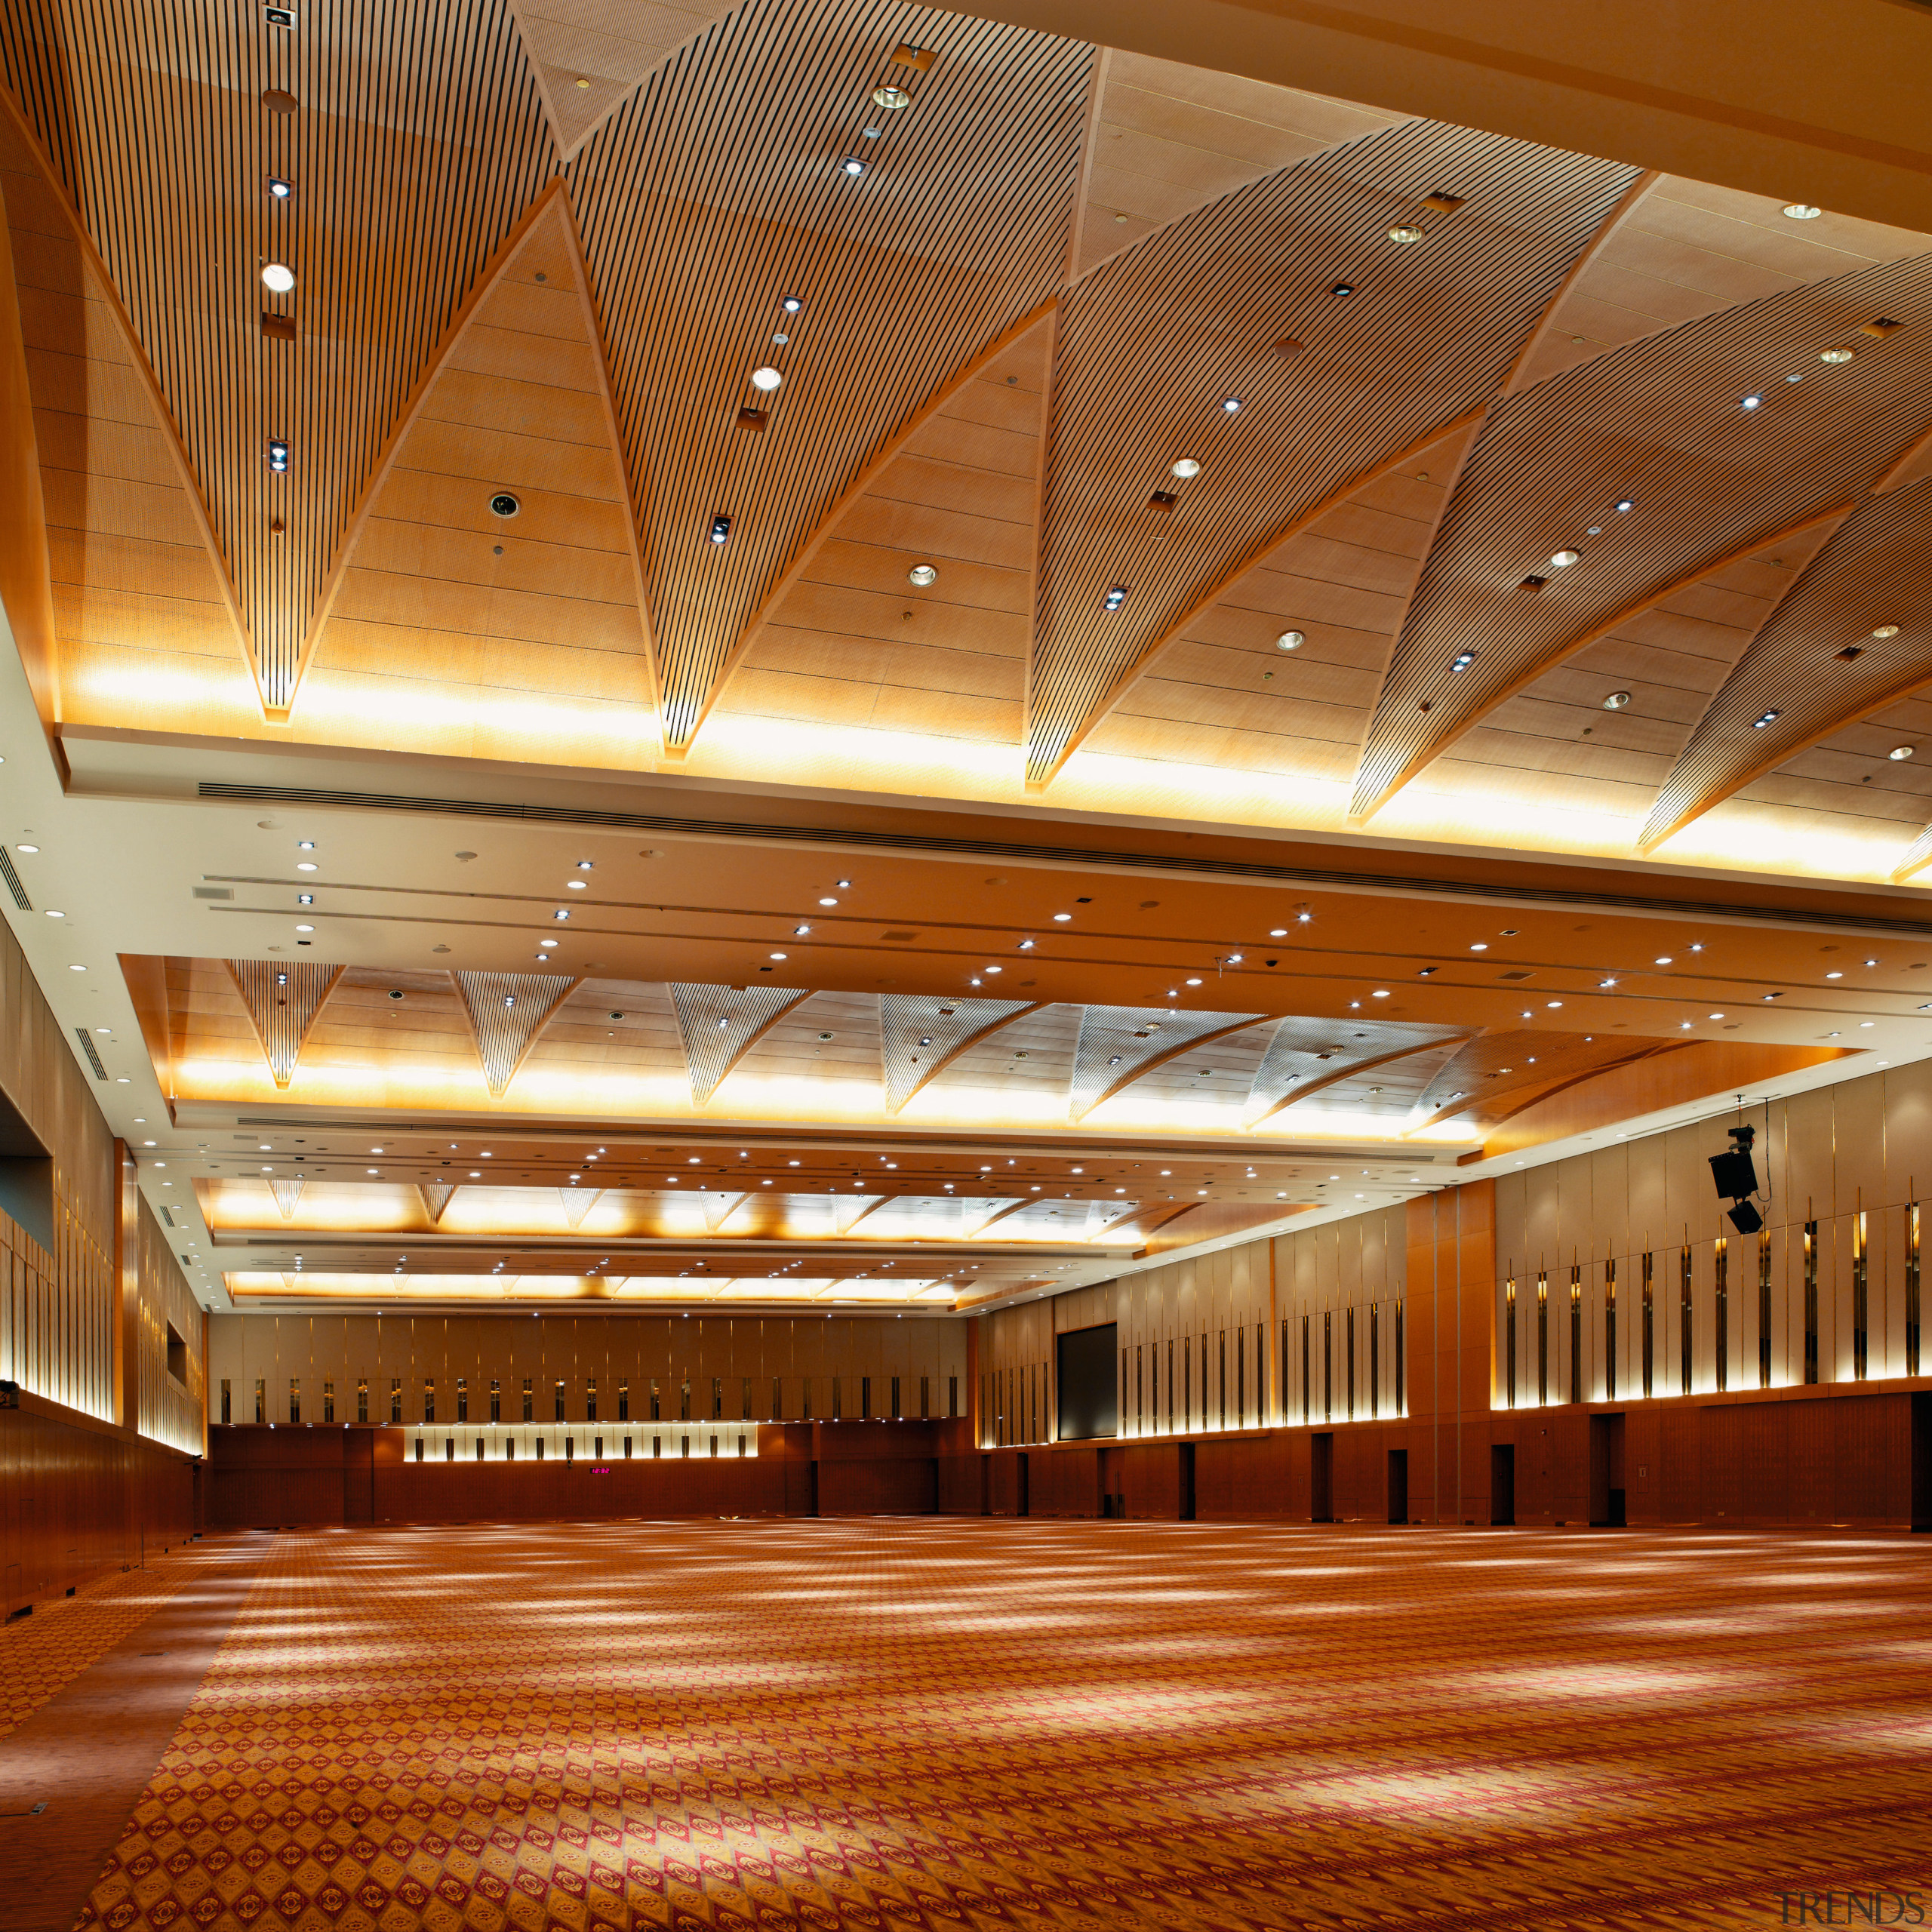 view of the grand ballroom that can accomodate architecture, auditorium, ballroom, ceiling, convention center, daylighting, function hall, hall, interior design, light, lighting, line, lobby, performing arts center, structure, symmetry, wood, brown